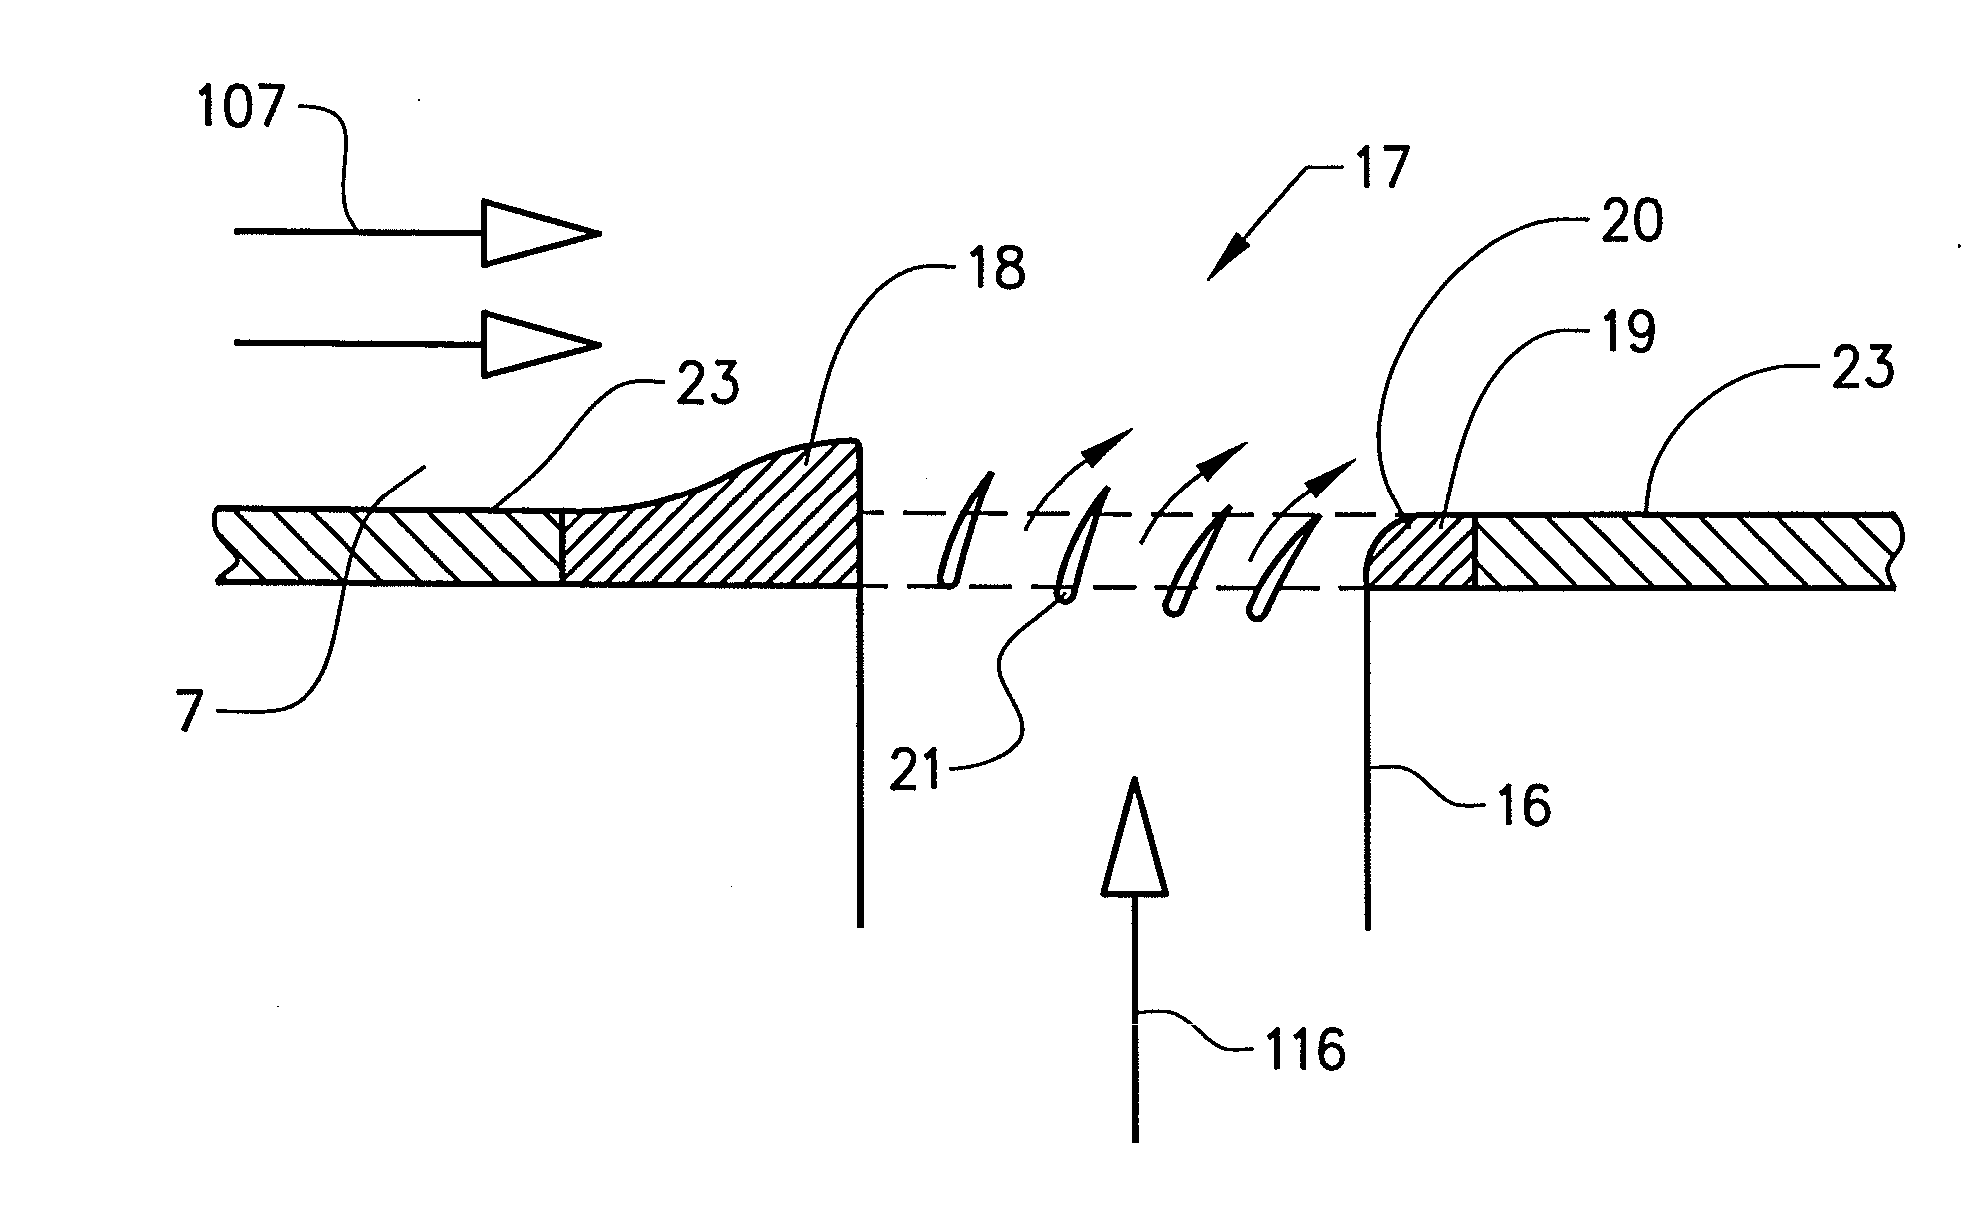 Bleed structure for a bleed passage in a gas turbine engine